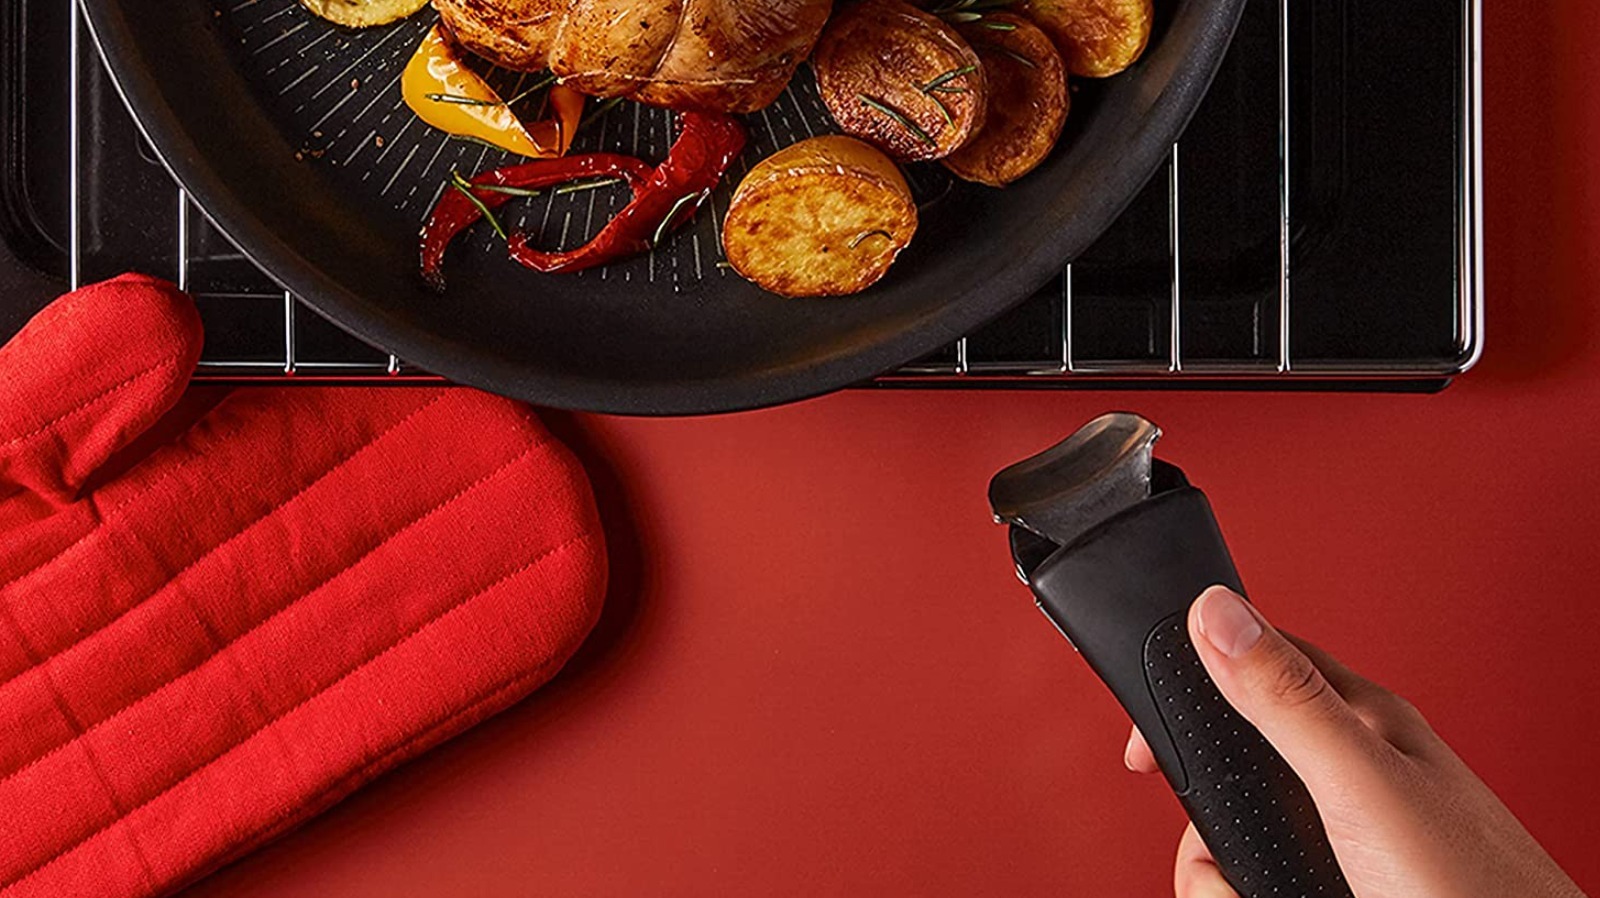 TikTok Is Fascinated By This Adjustable Pan Handle